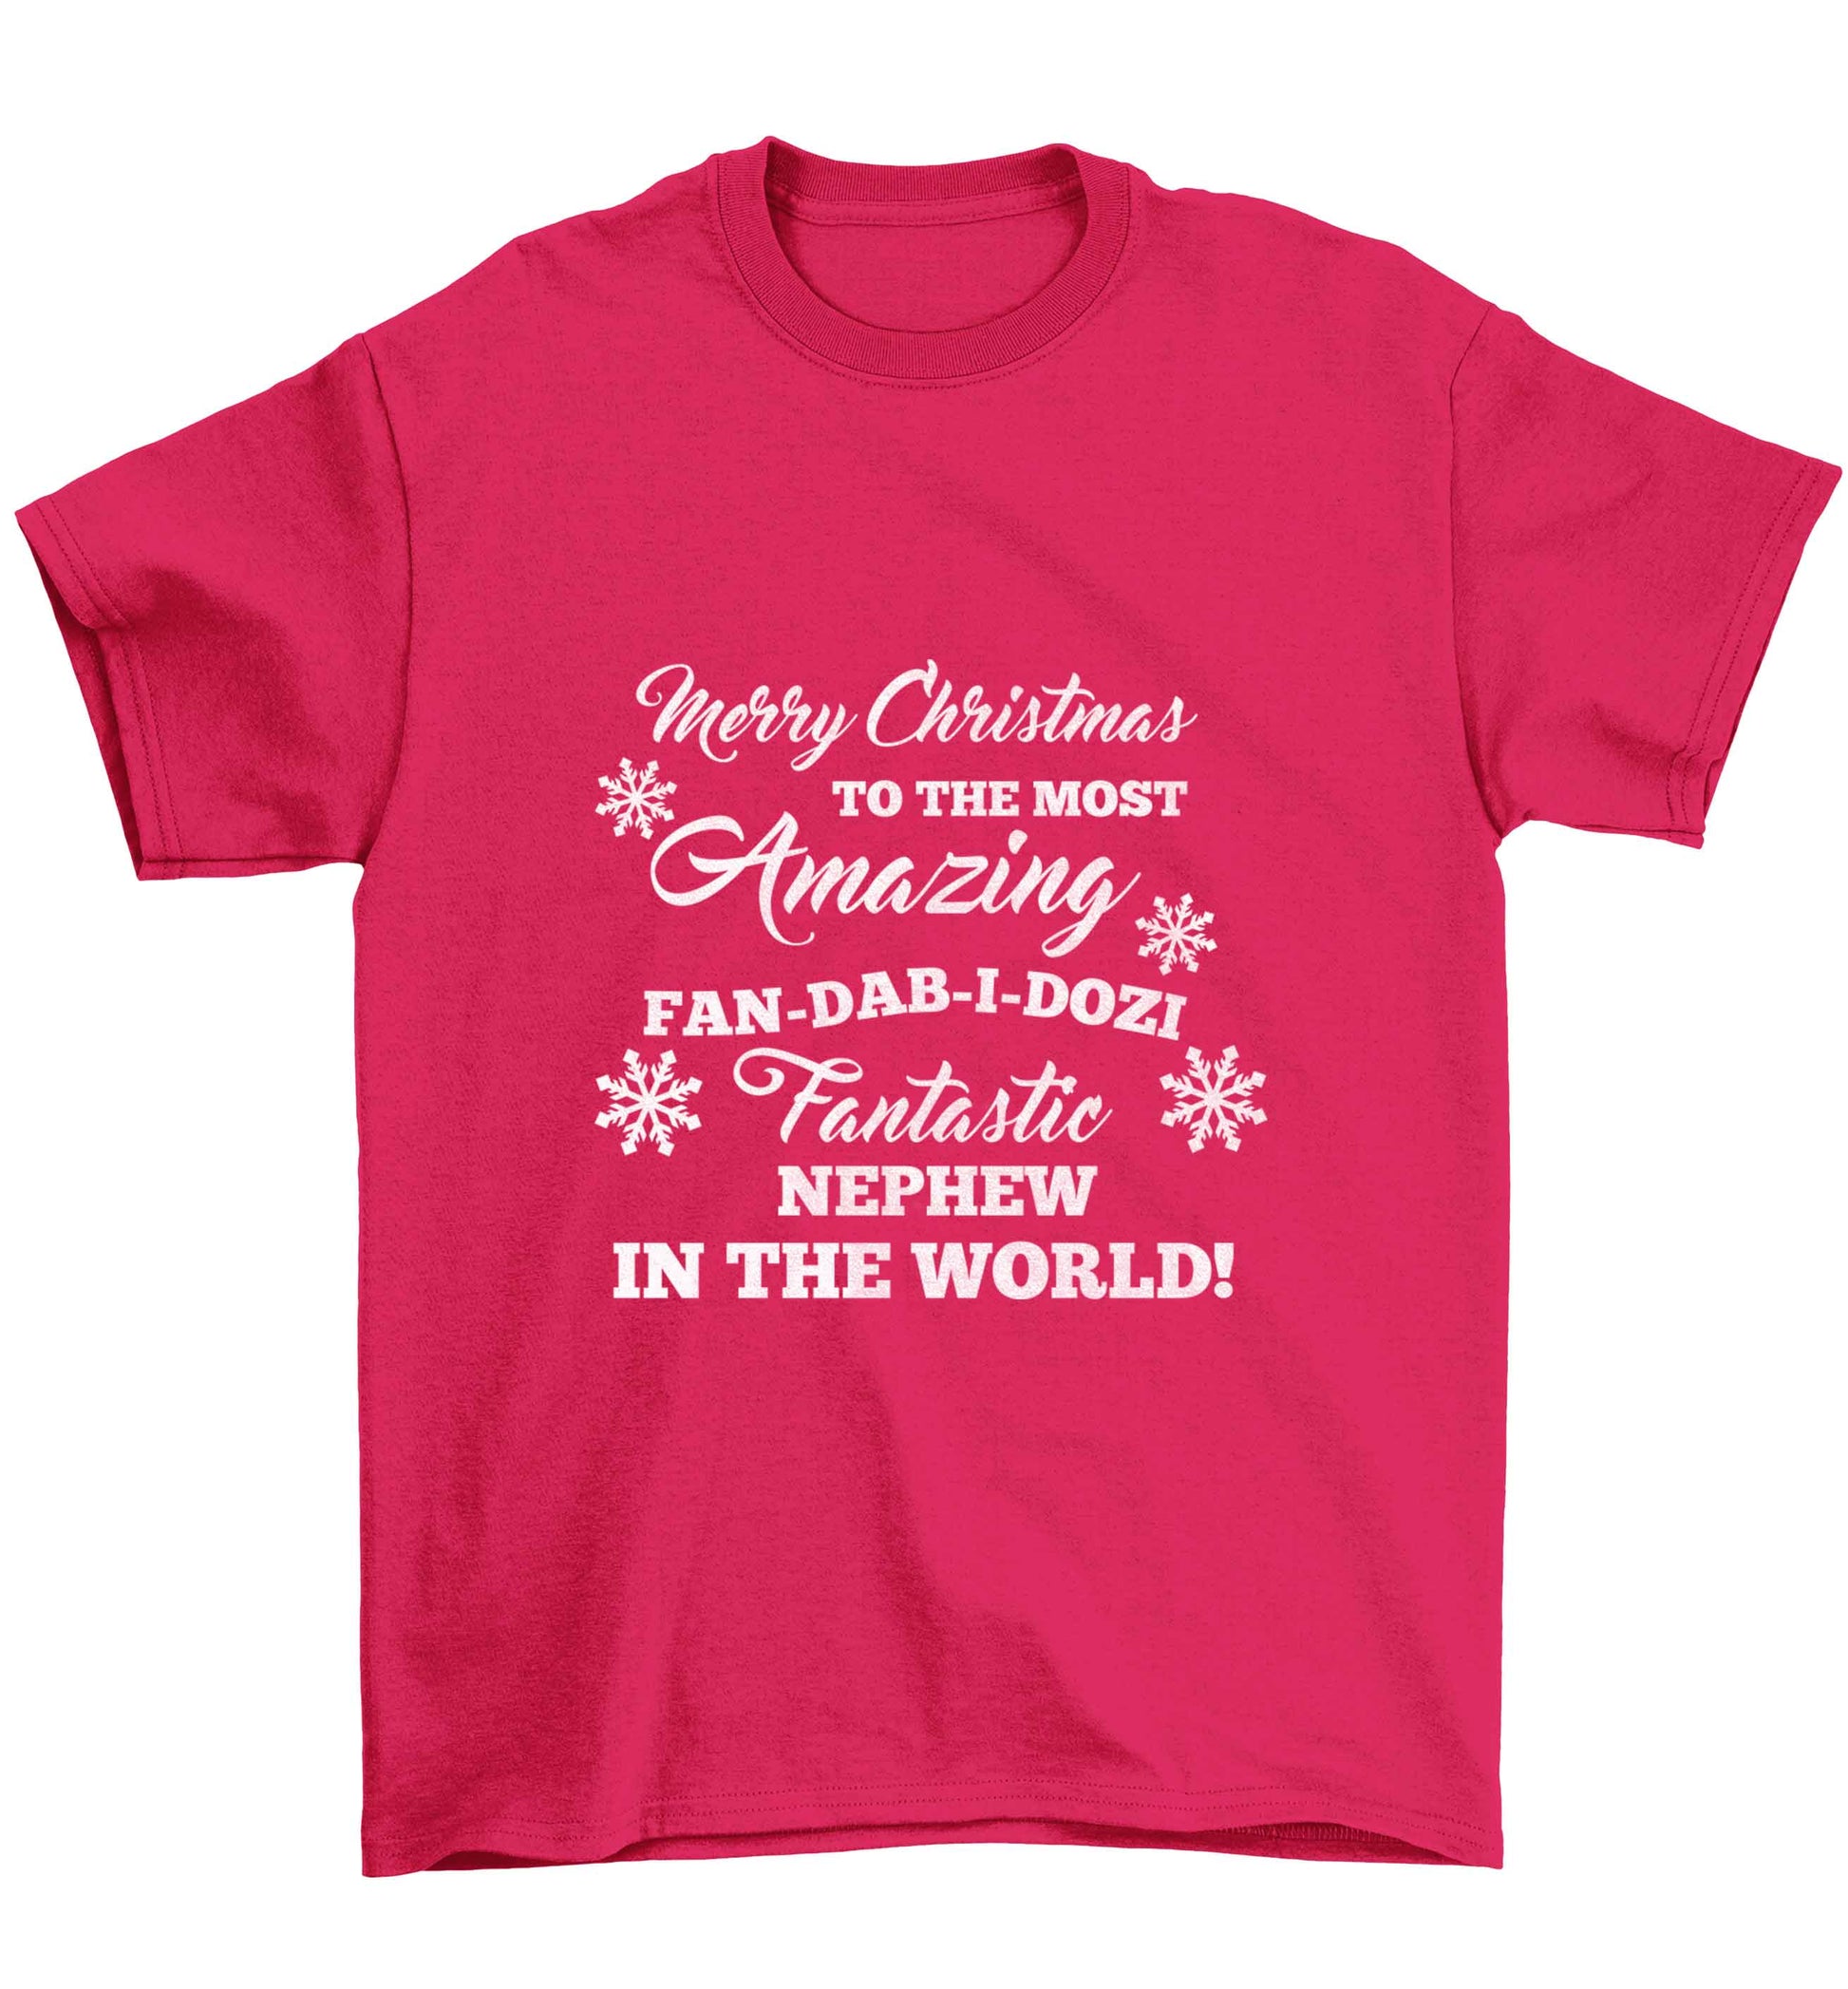 Merry Christmas to the most amazing fan-dab-i-dozi fantasic Nephew in the world Children's pink Tshirt 12-13 Years